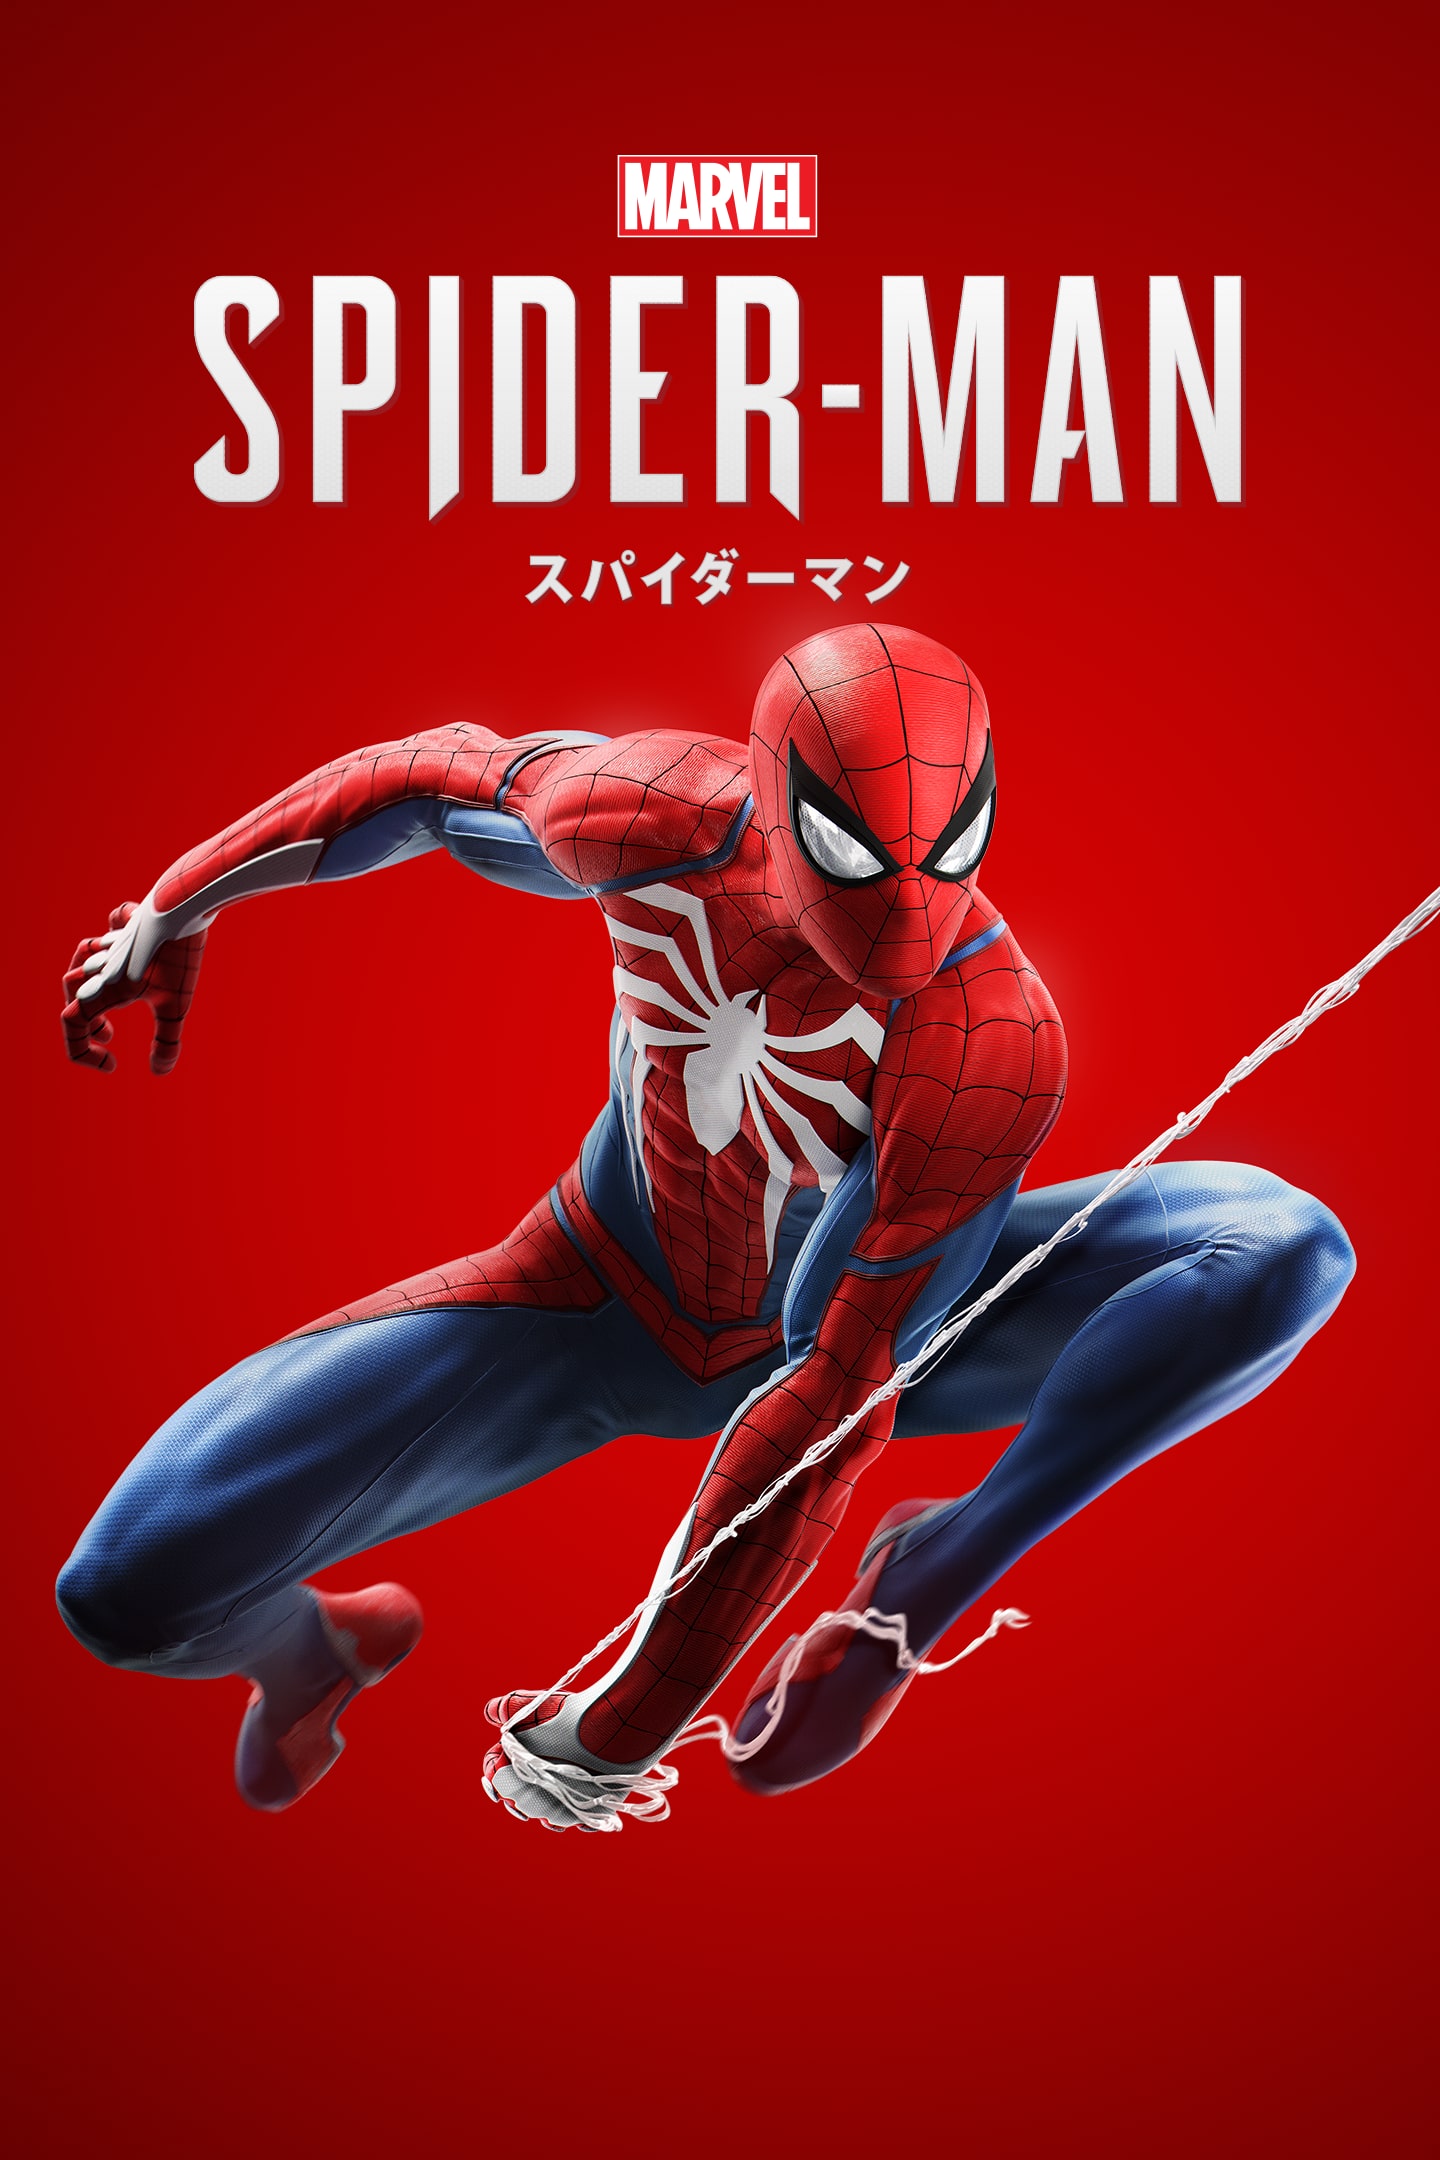 Marvel's Spider-Man Game of the Year Edition